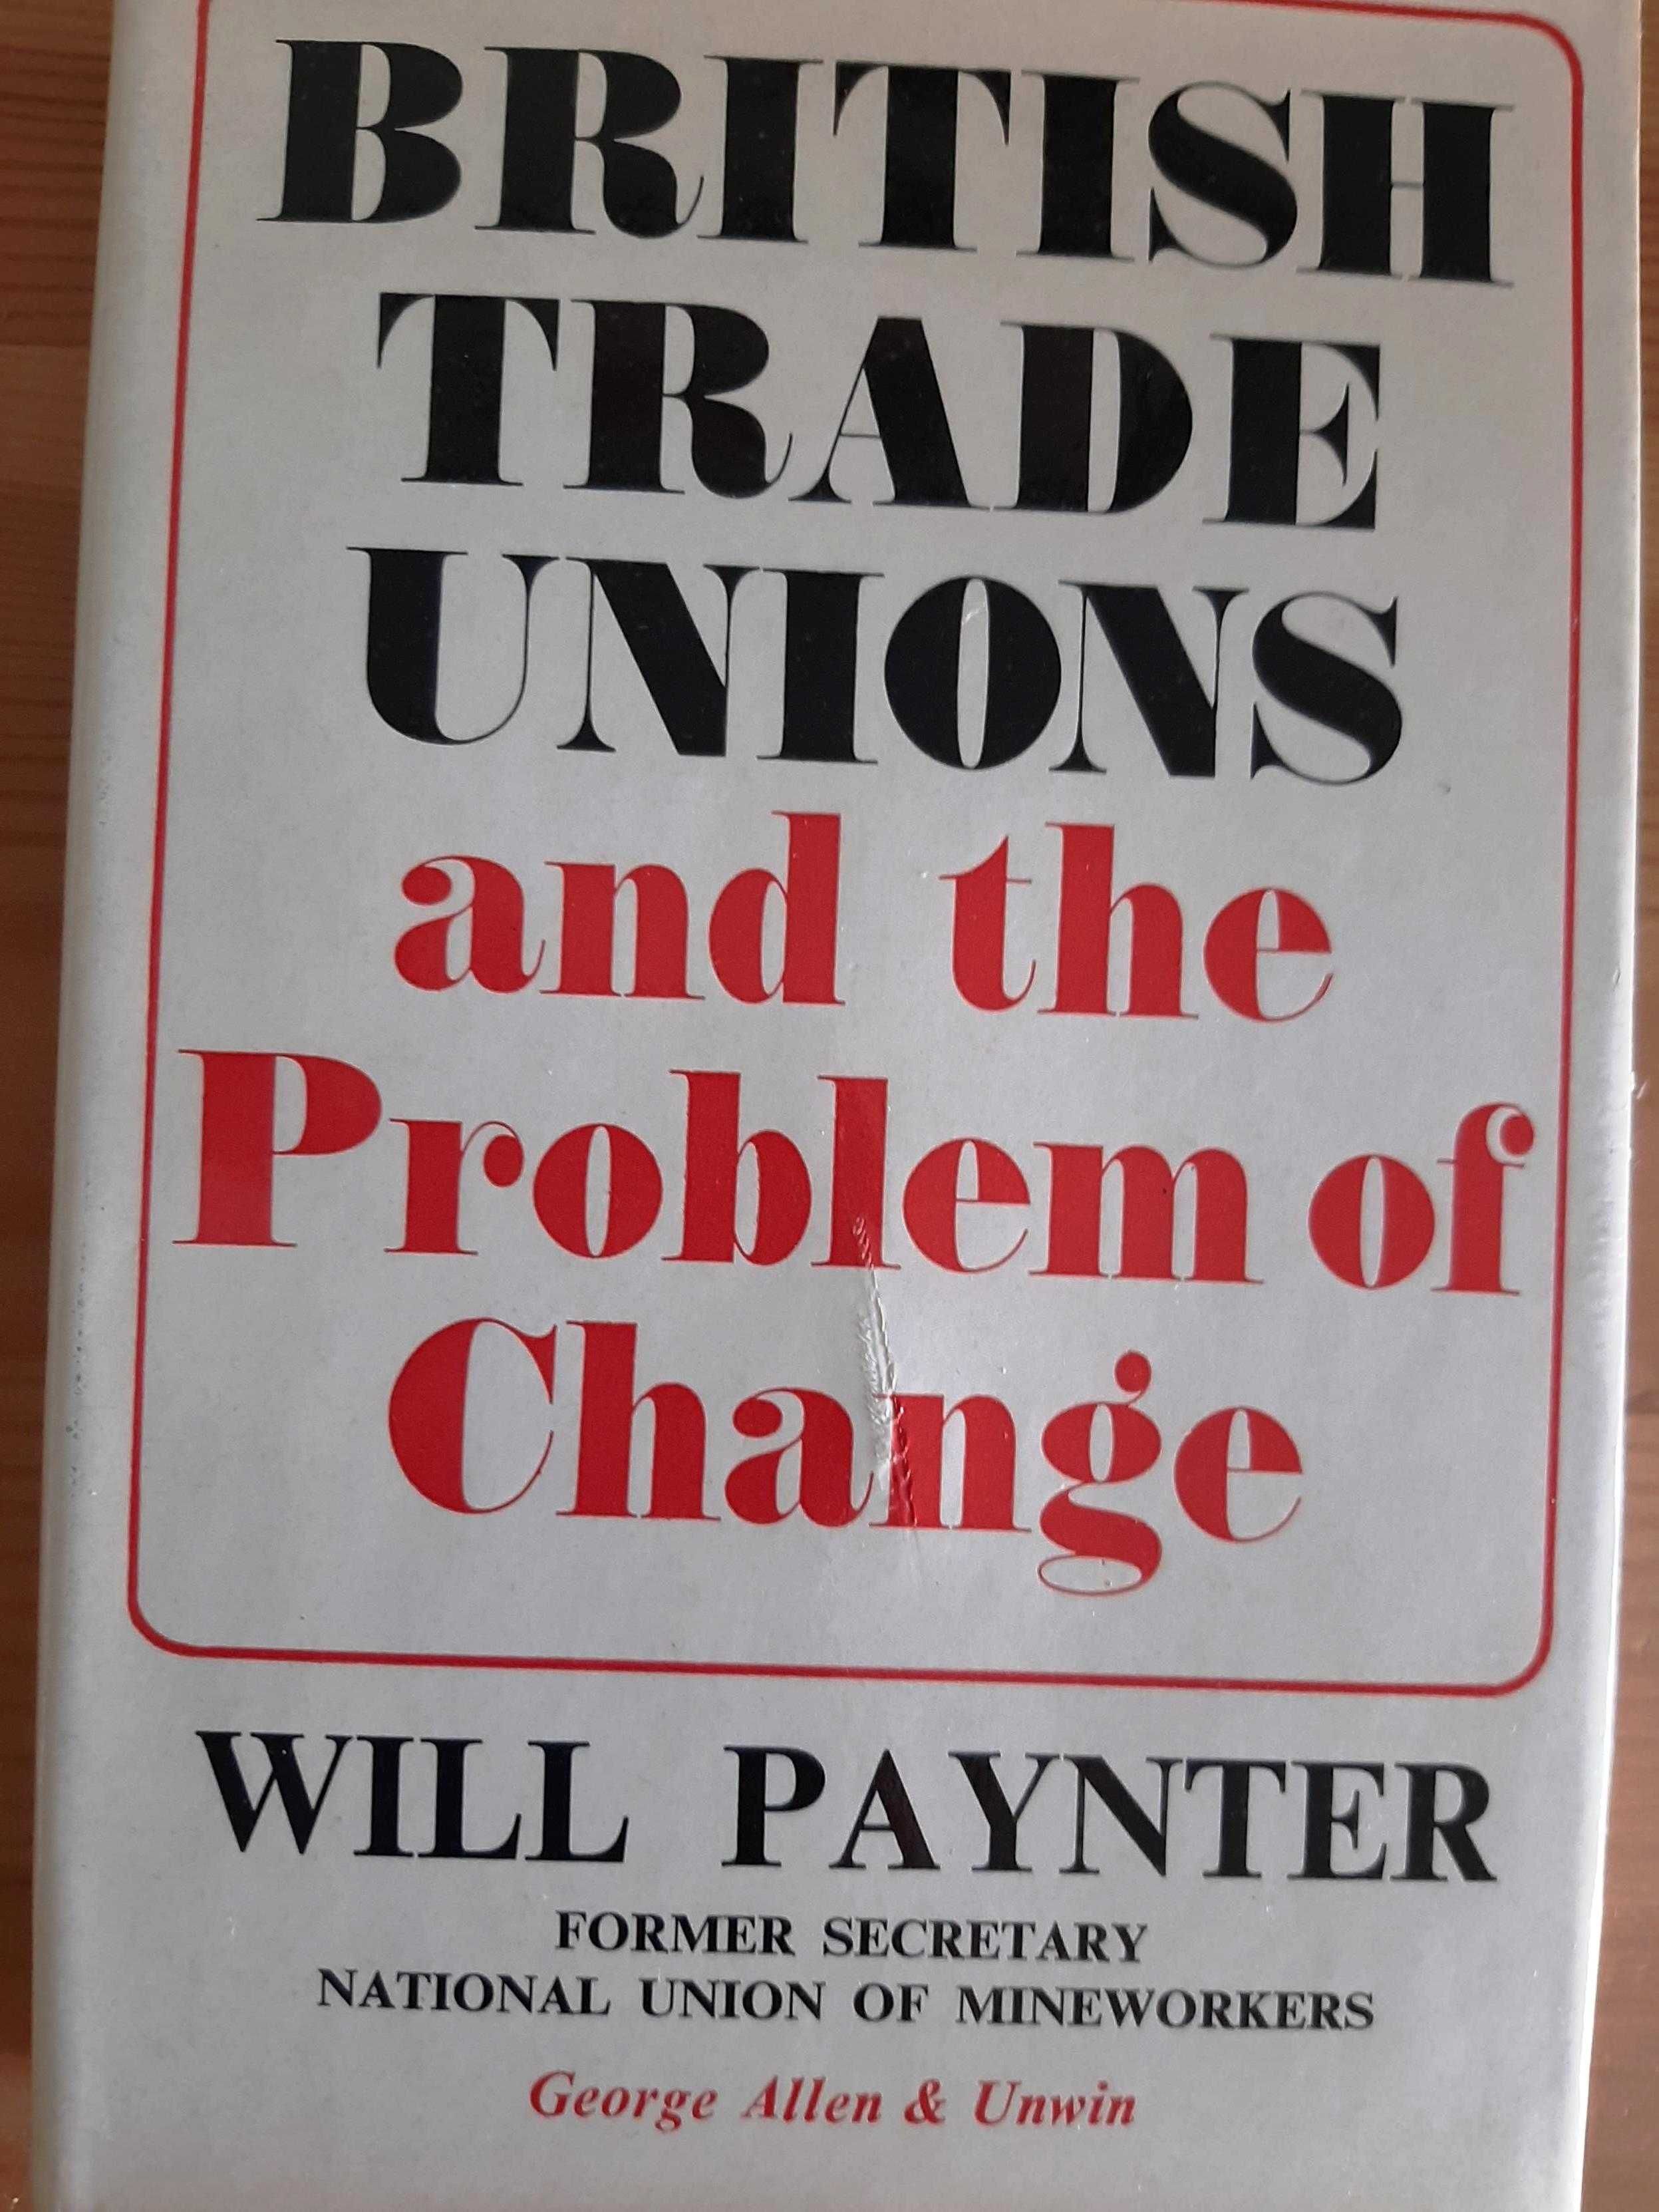 British Trade Unions and the problem of change